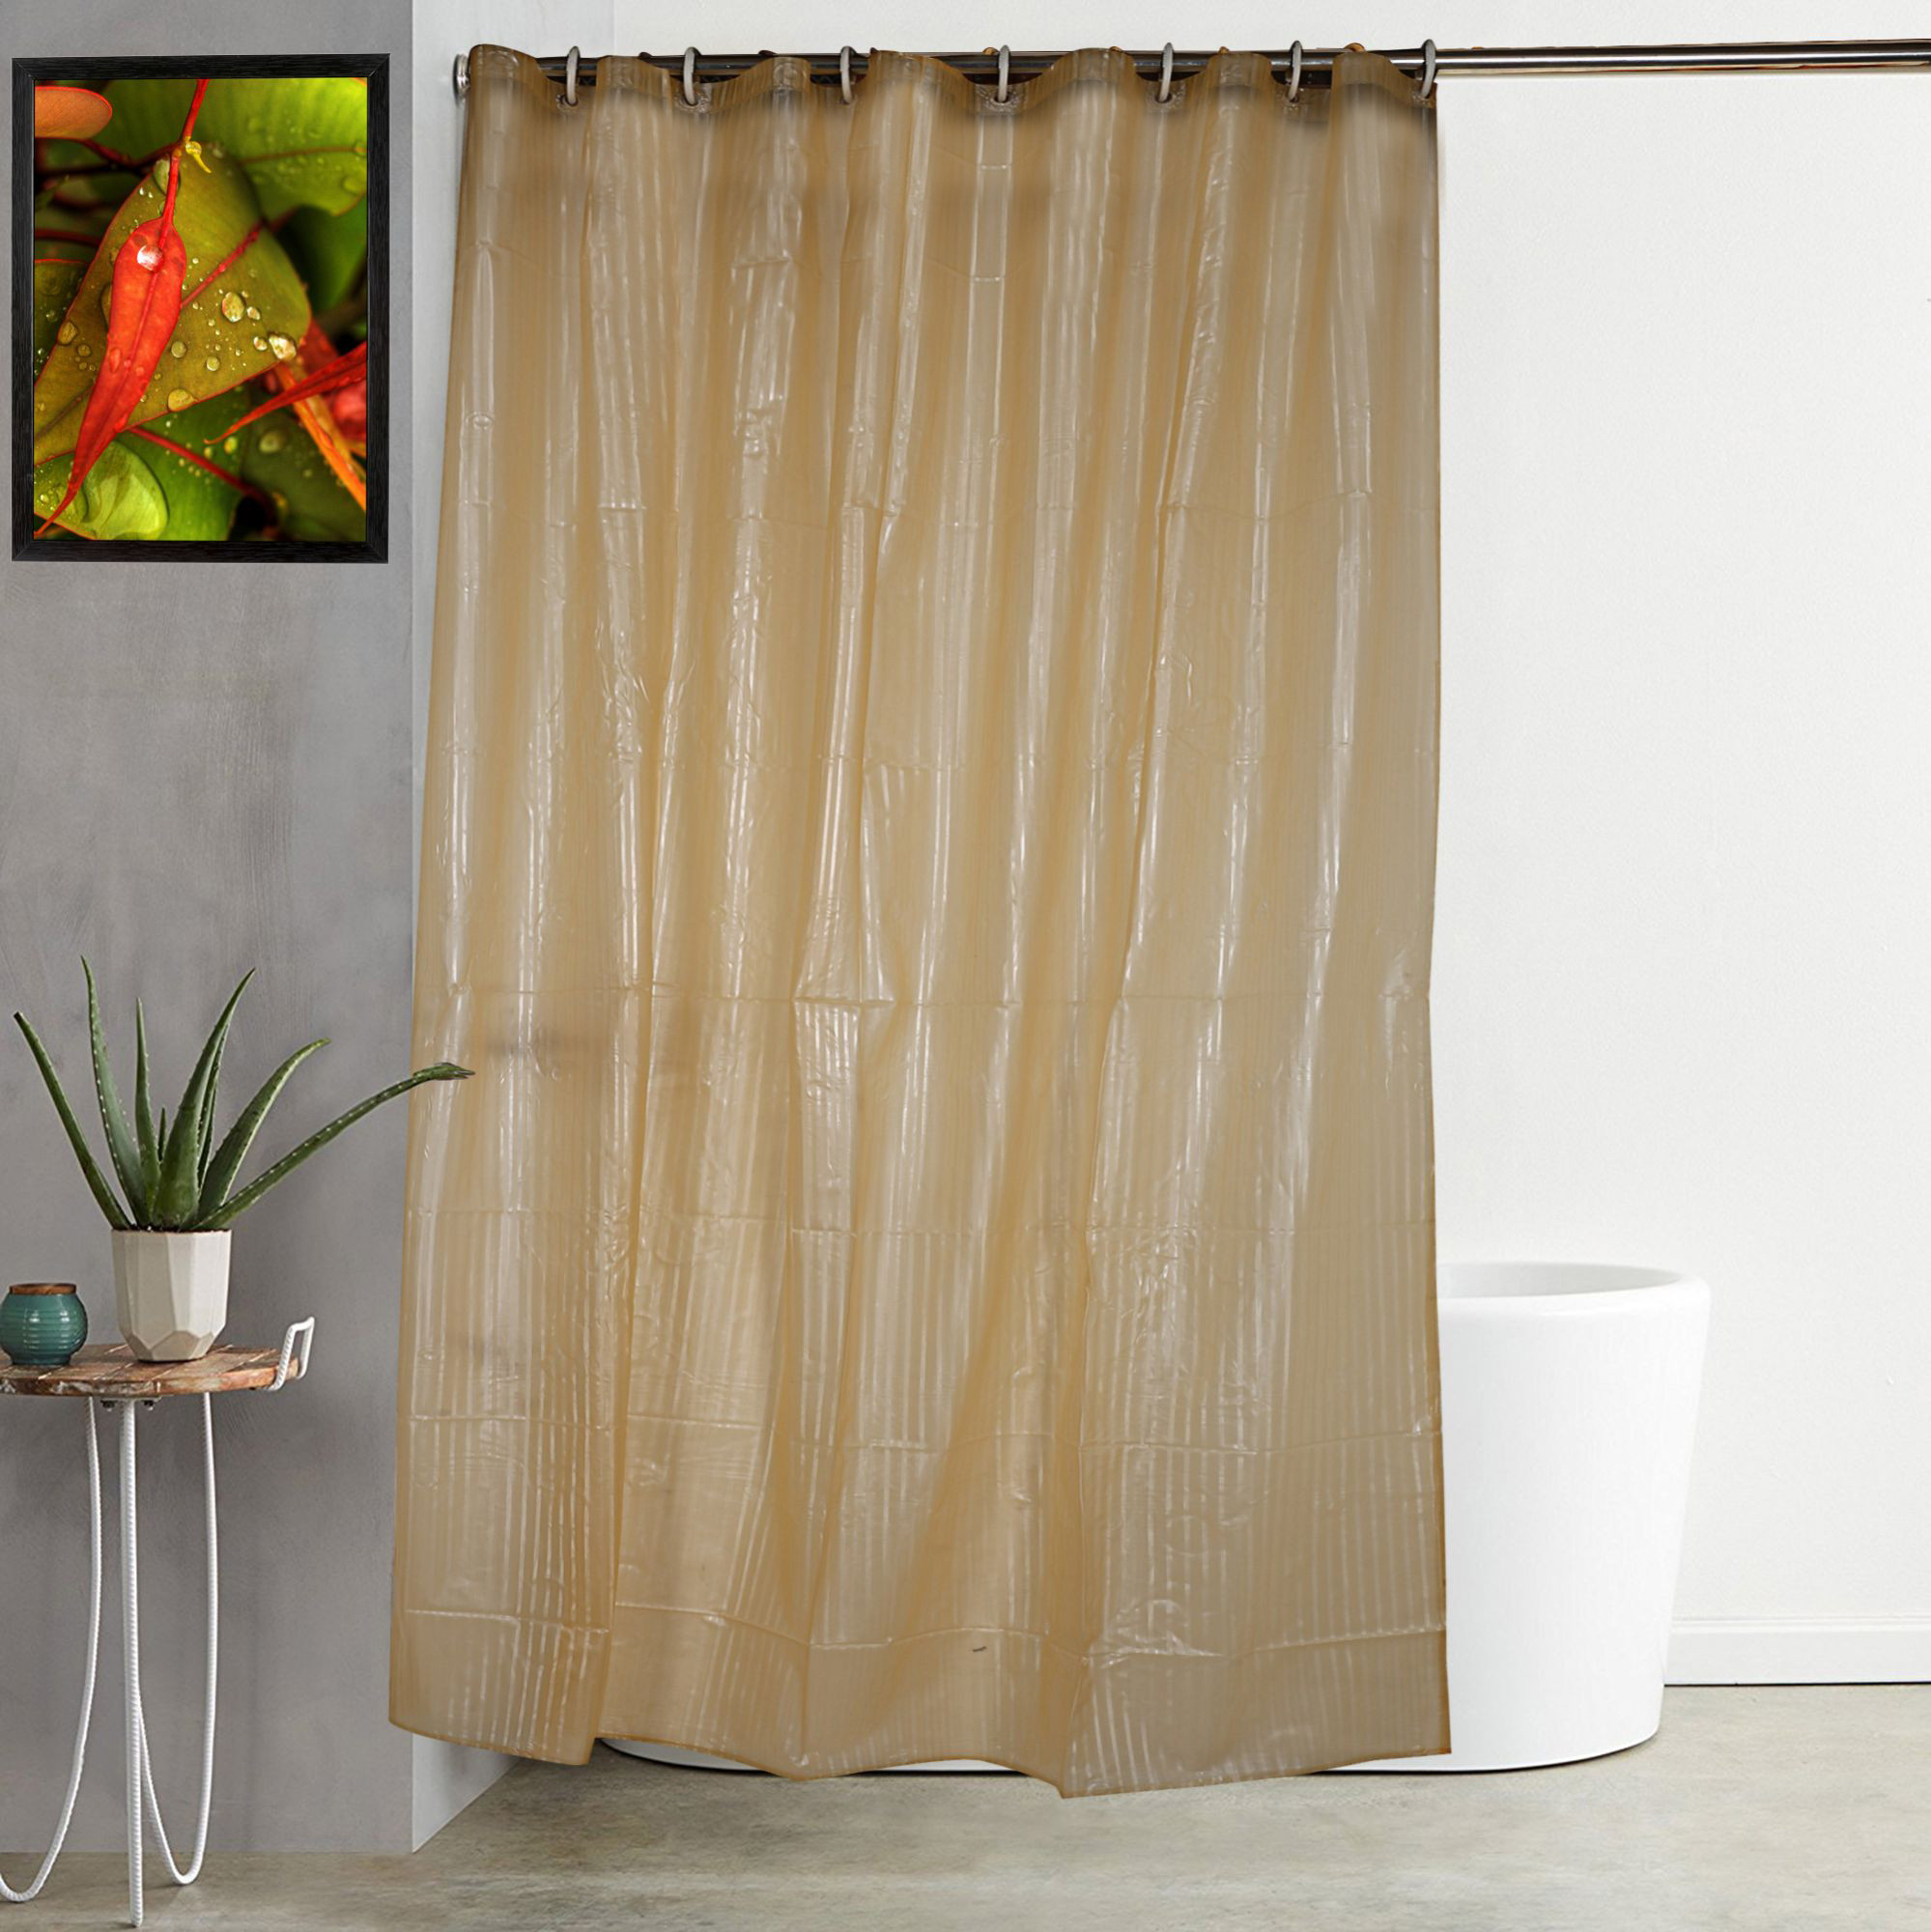 Kuber Industries 0.20mm Lining Design Stain Resistant, No Odor, Waterproof PVC AC Curtain With Hooks,7 Feet (Green)